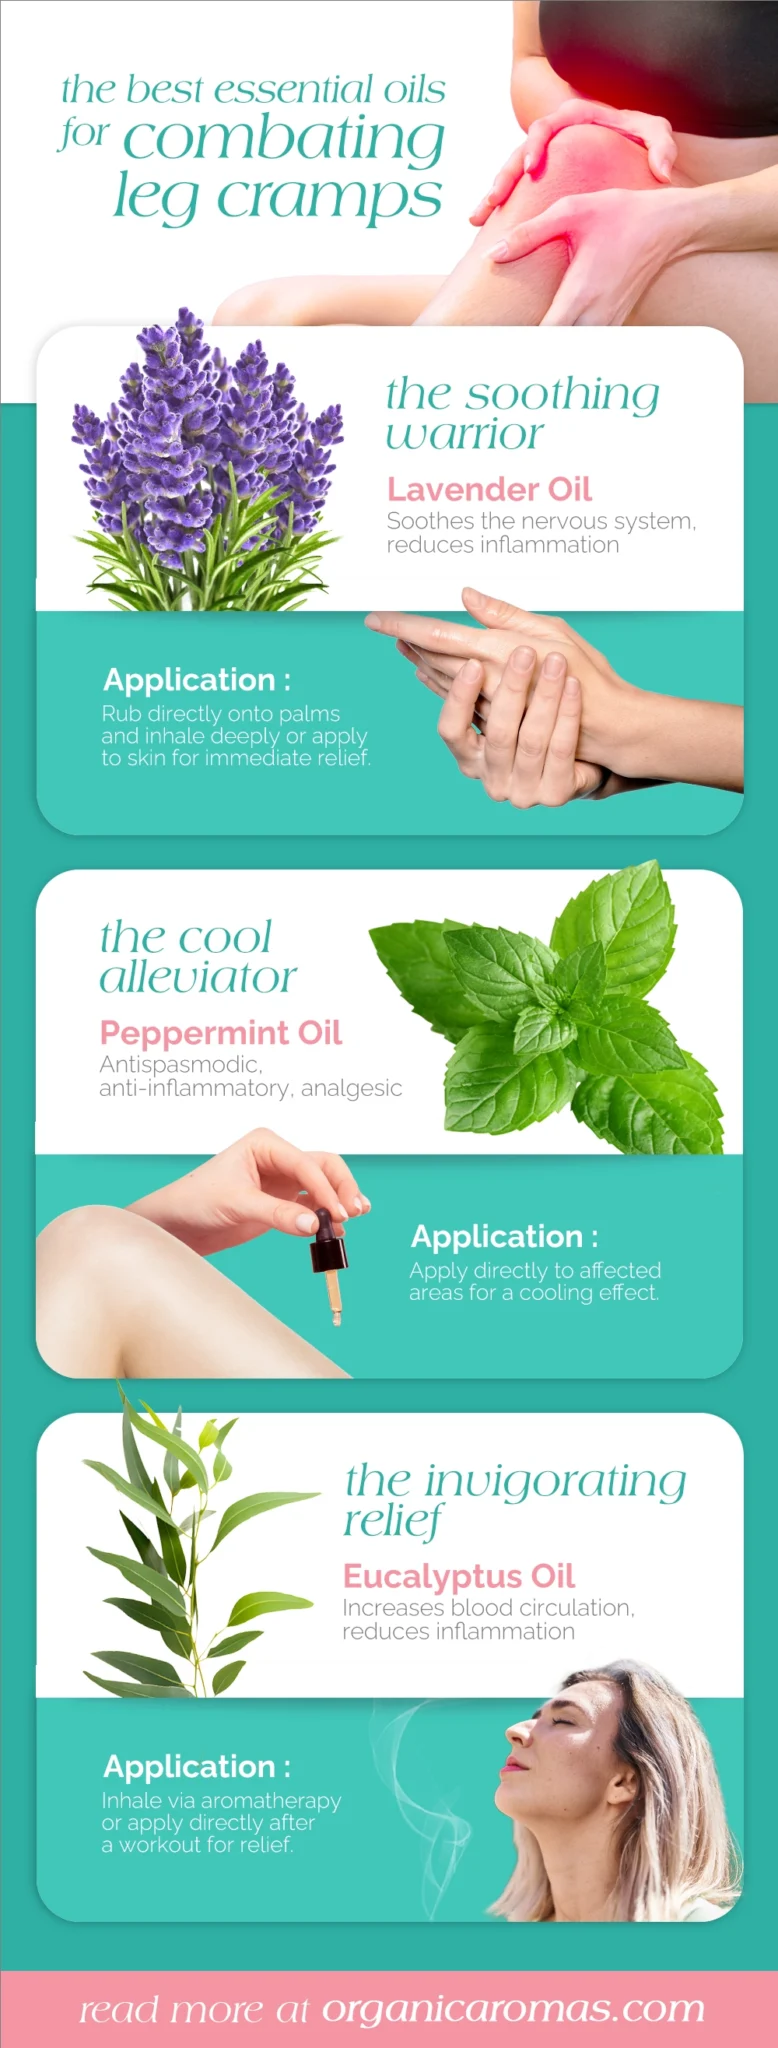 The Best Essential Oils for Combating leg Cramps Infographic by Organic Aromas